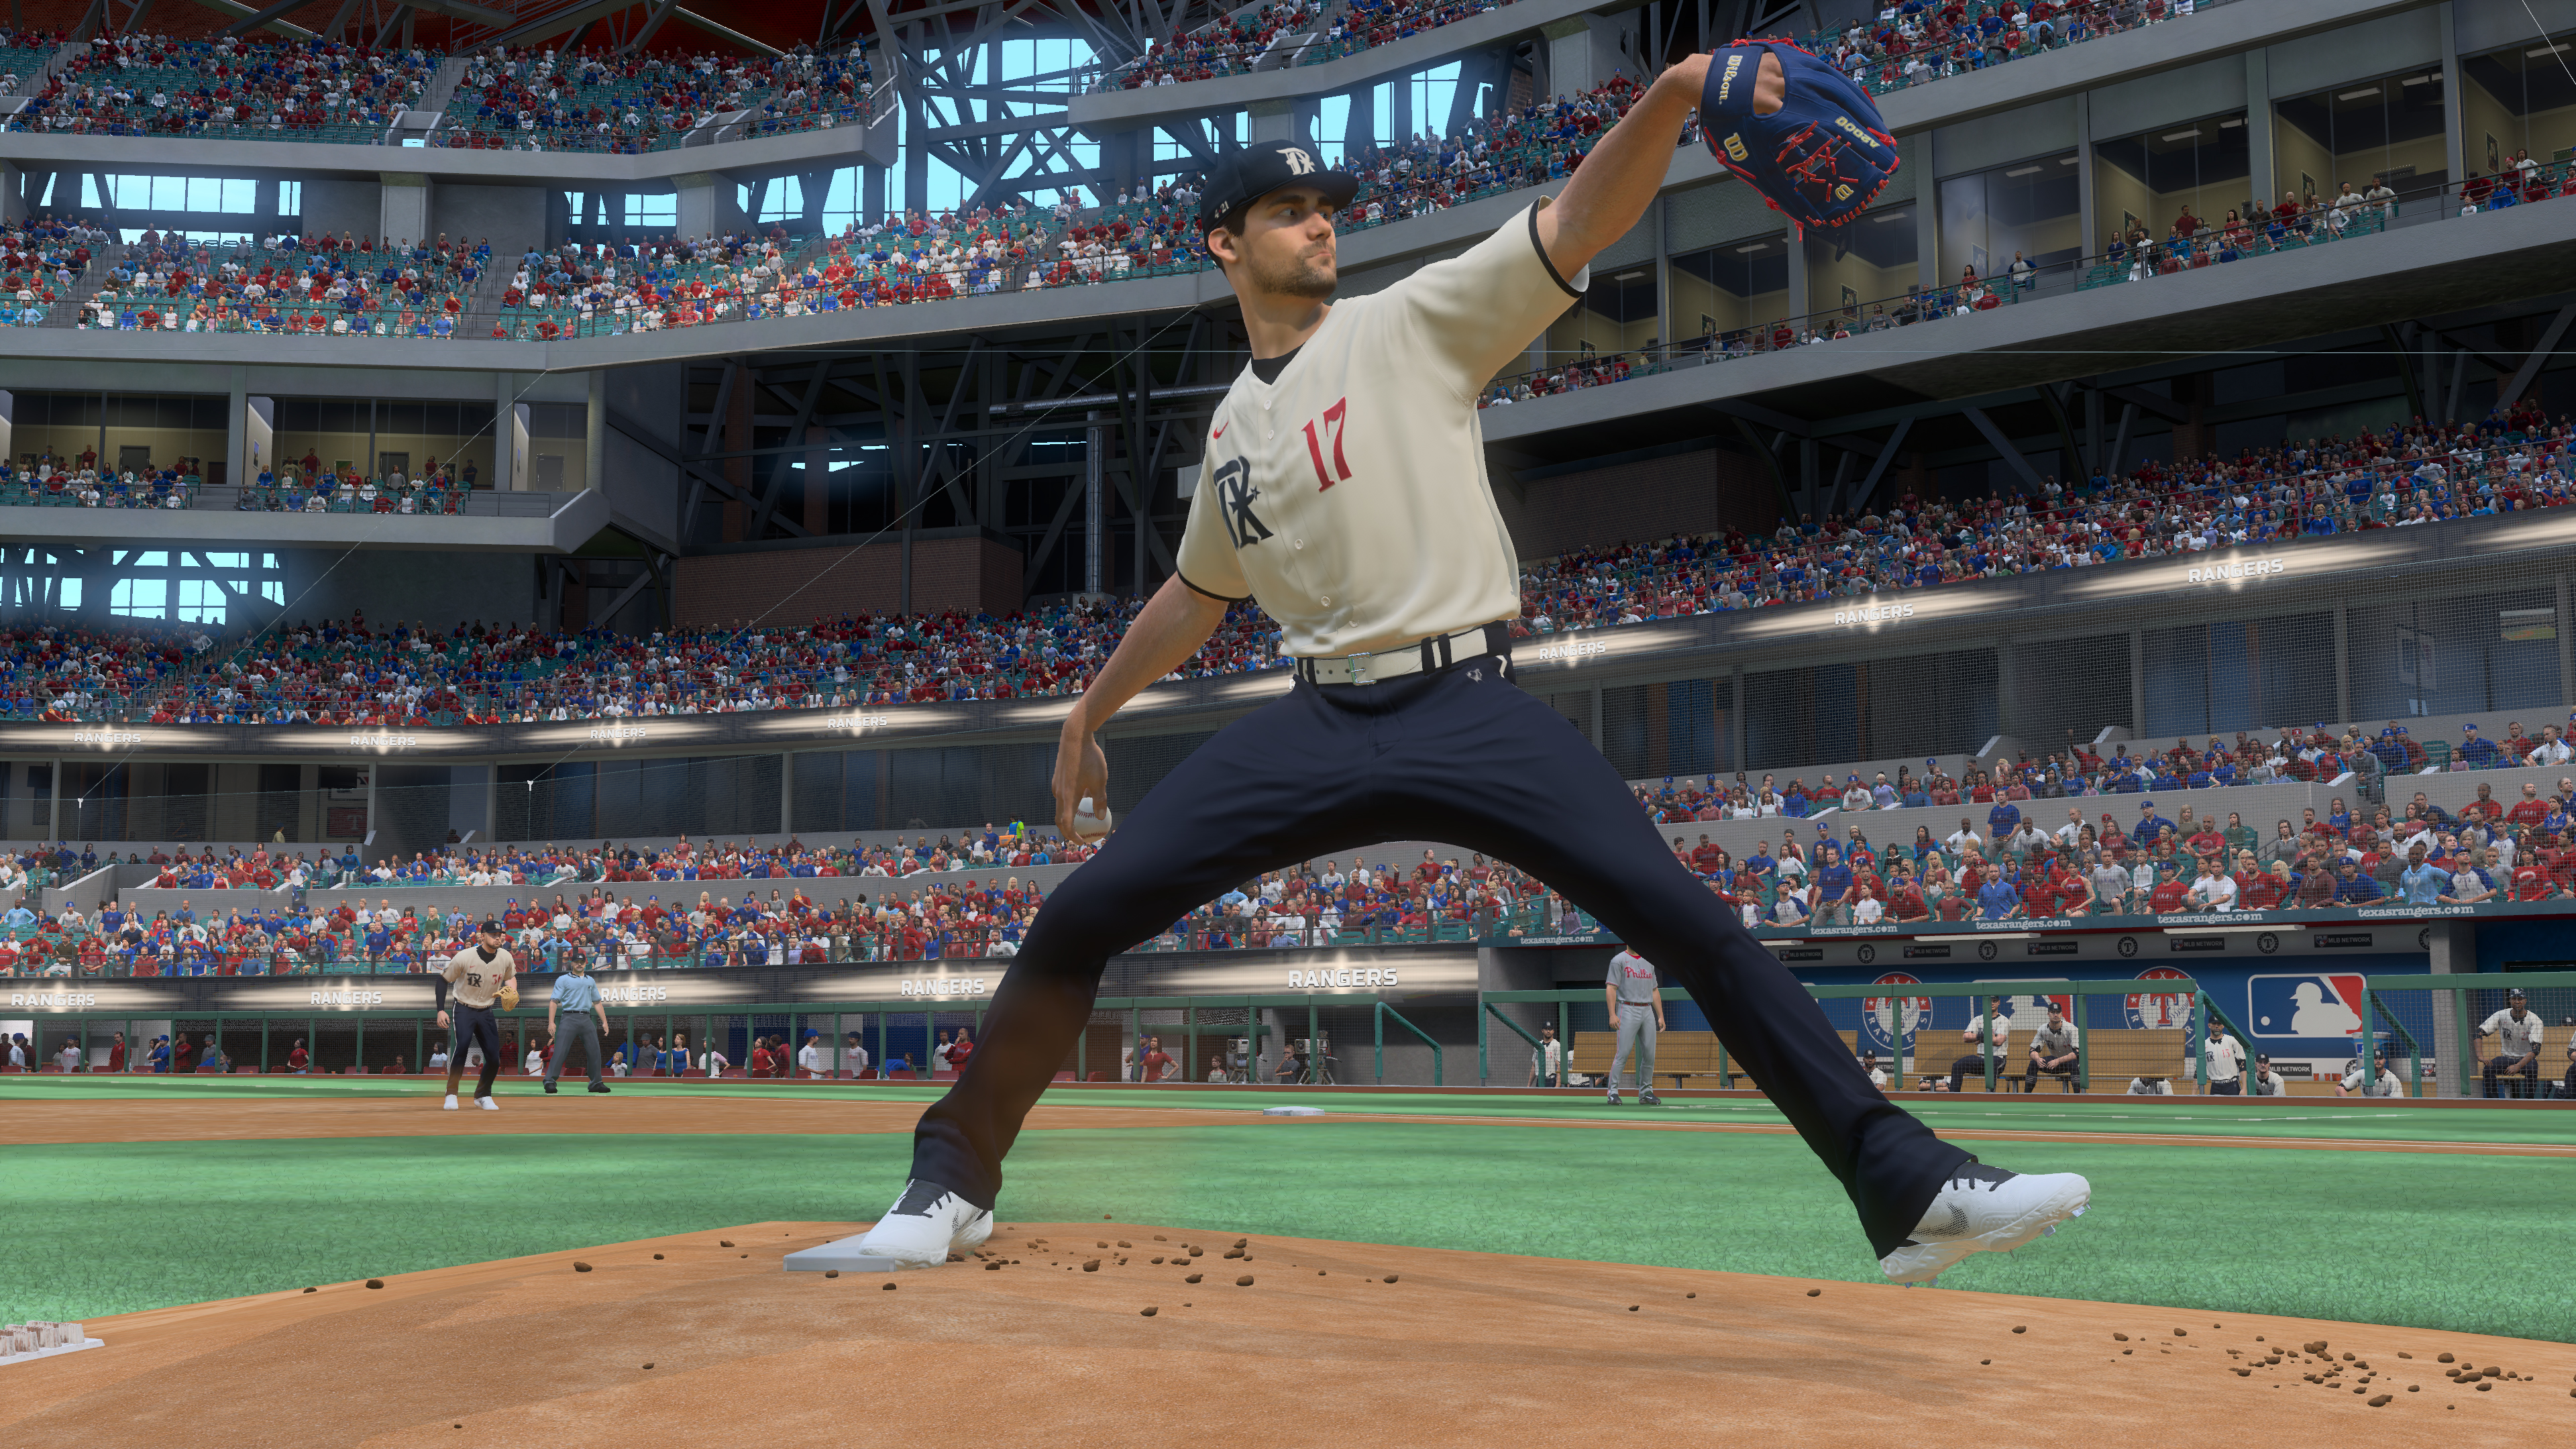 Nike City Connect Jerseys Coming to MLB The Show 22